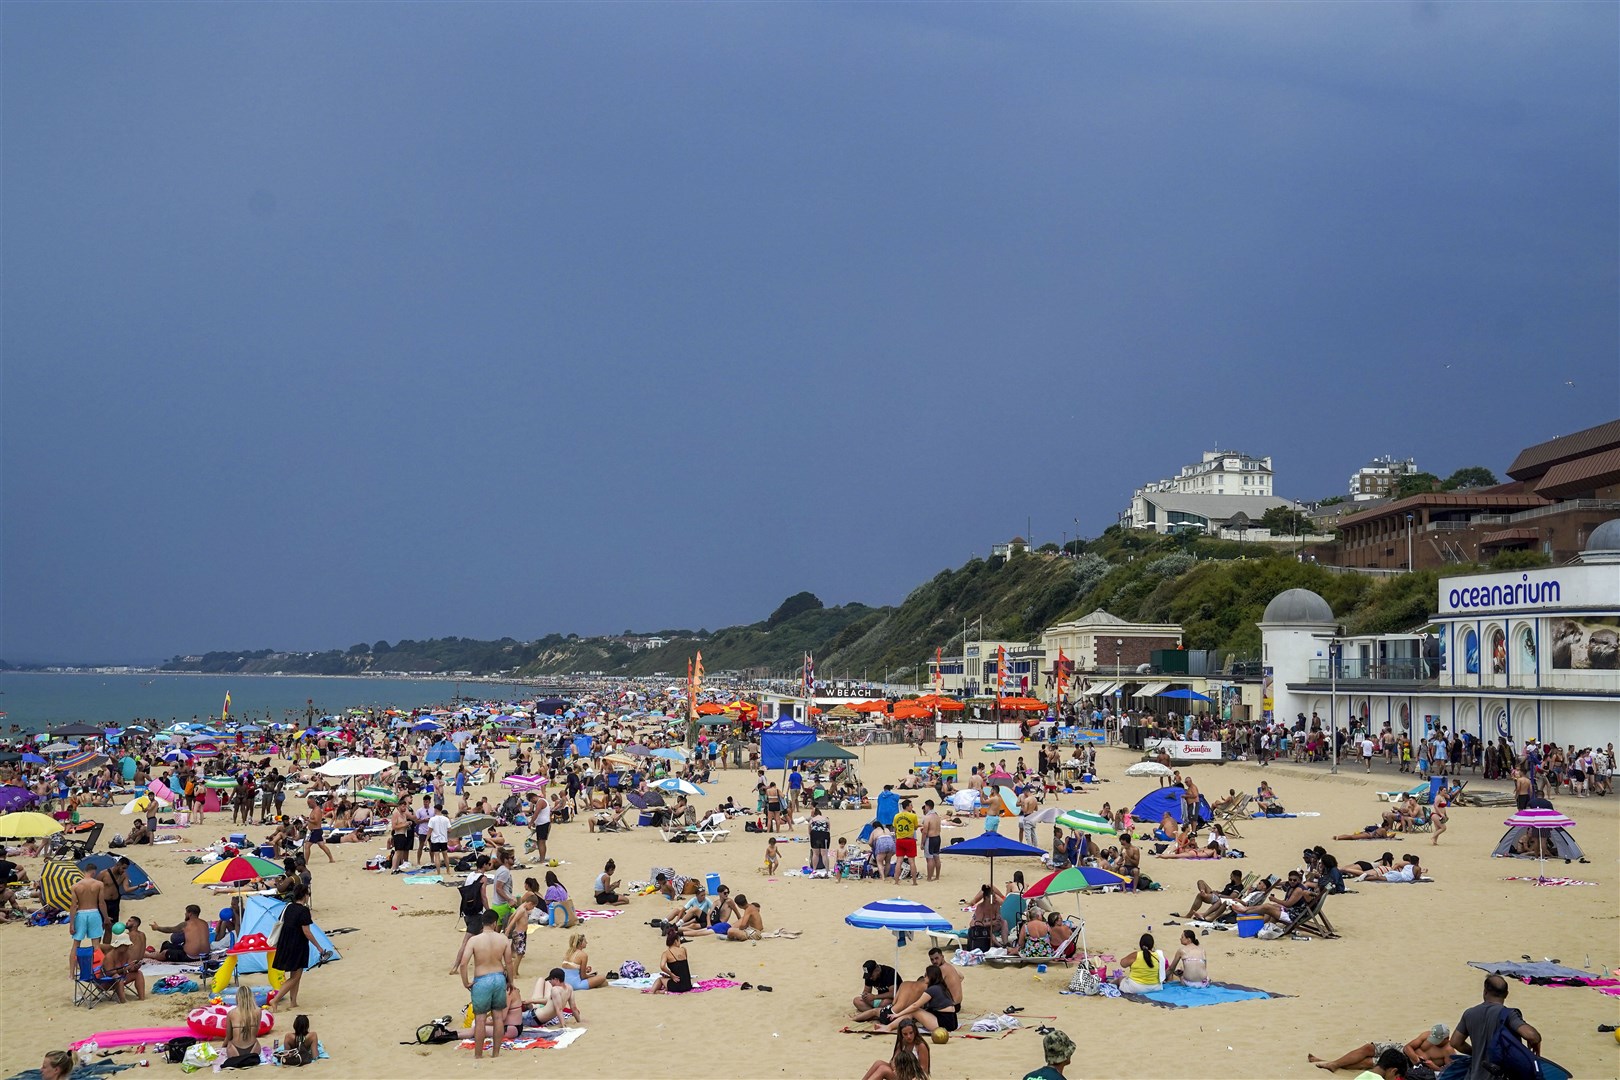 In stark contrast, Britain’s beaches – including here in Bournemouth – provided a cool haven for many over the summer, as a heatwave saw temperatures in some places top 40C (Steve Parsons/PA)